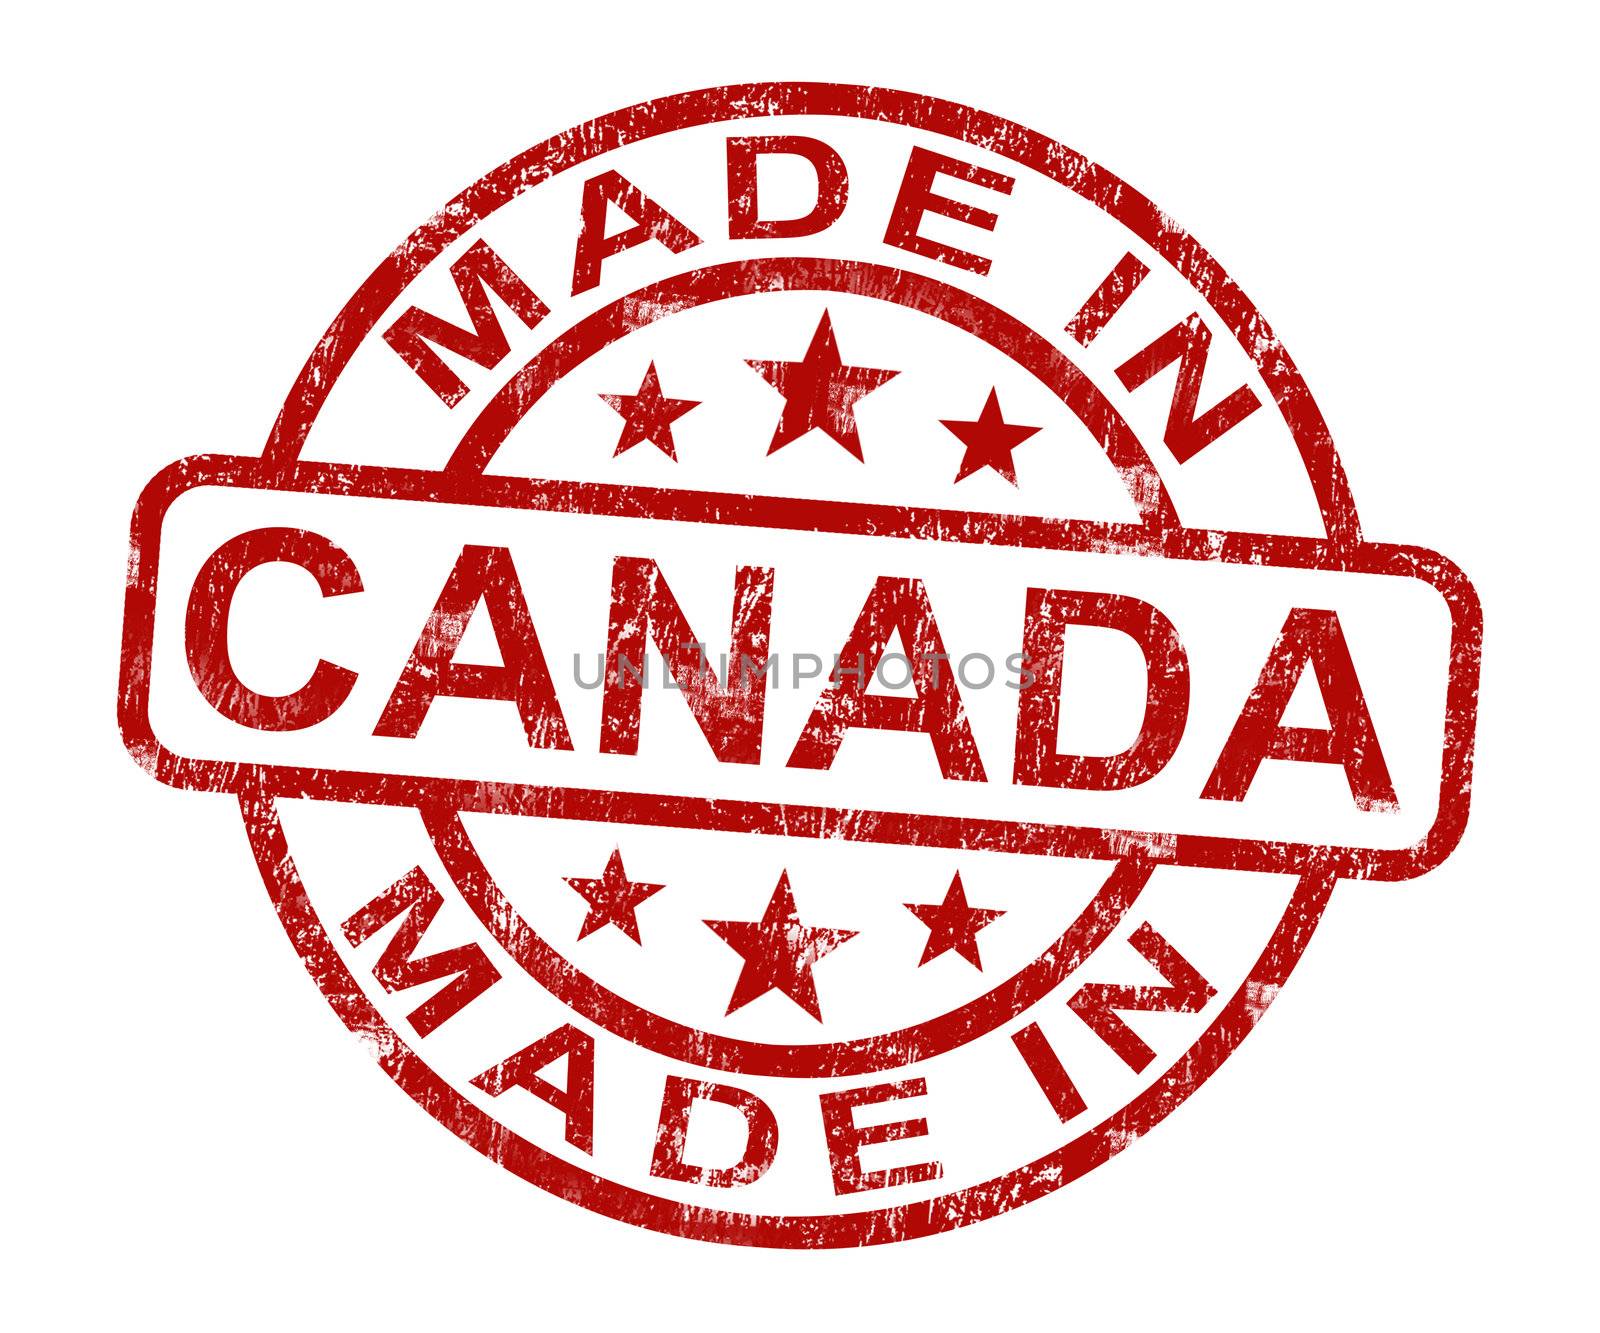 Made In Canada Stamp Shows Canadian Product Or Produce by stuartmiles